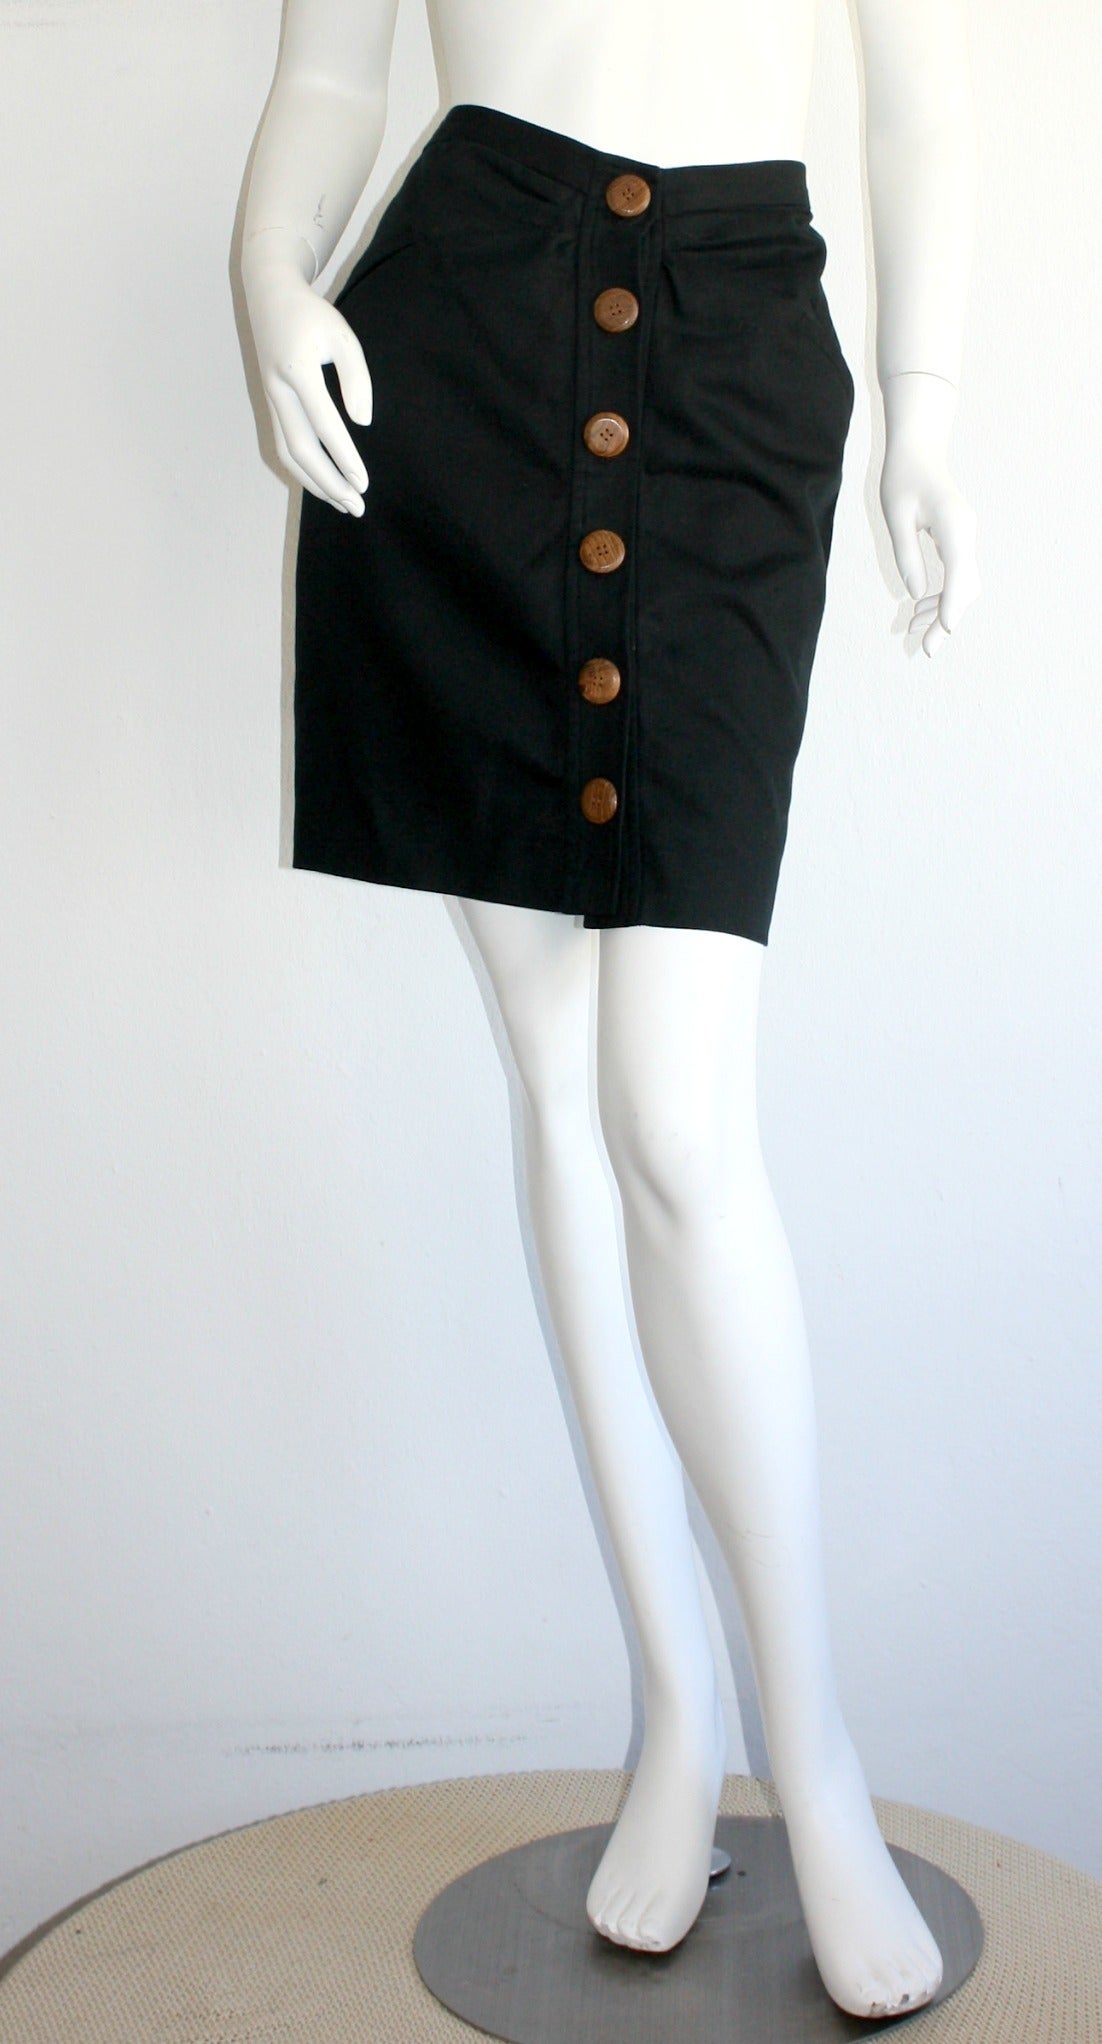 Beautiful classic black YSL skirt, with a twist! Functional oversized wood buttons down the front. The perfect little black skirt. In great condition. Marked Size 42

Measurements:
30 inch waist
40 inch hips
19 inches in length